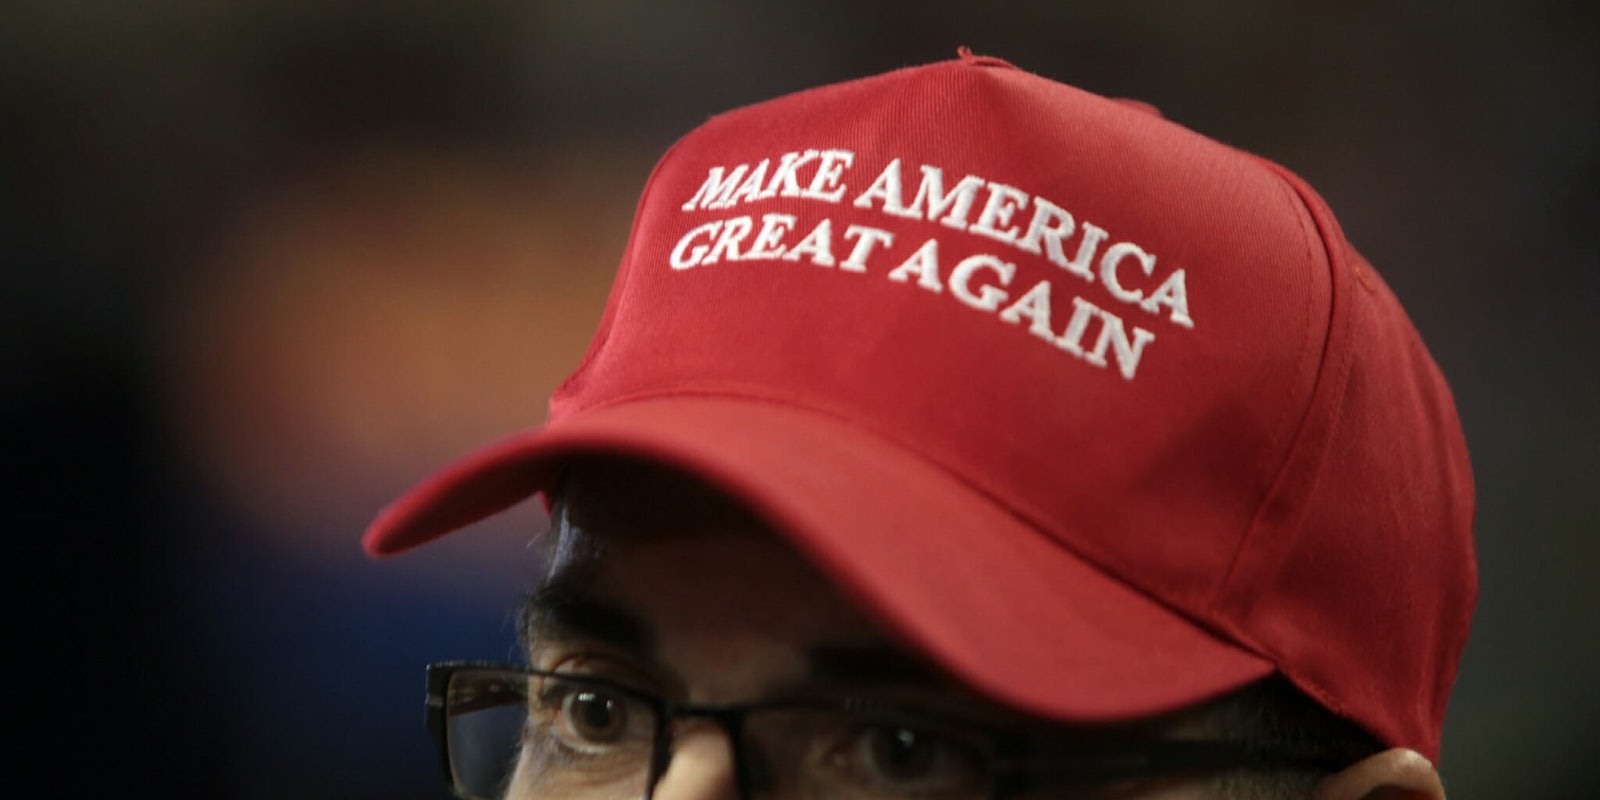 A man wearing a red 'Make America Great Again' hat.